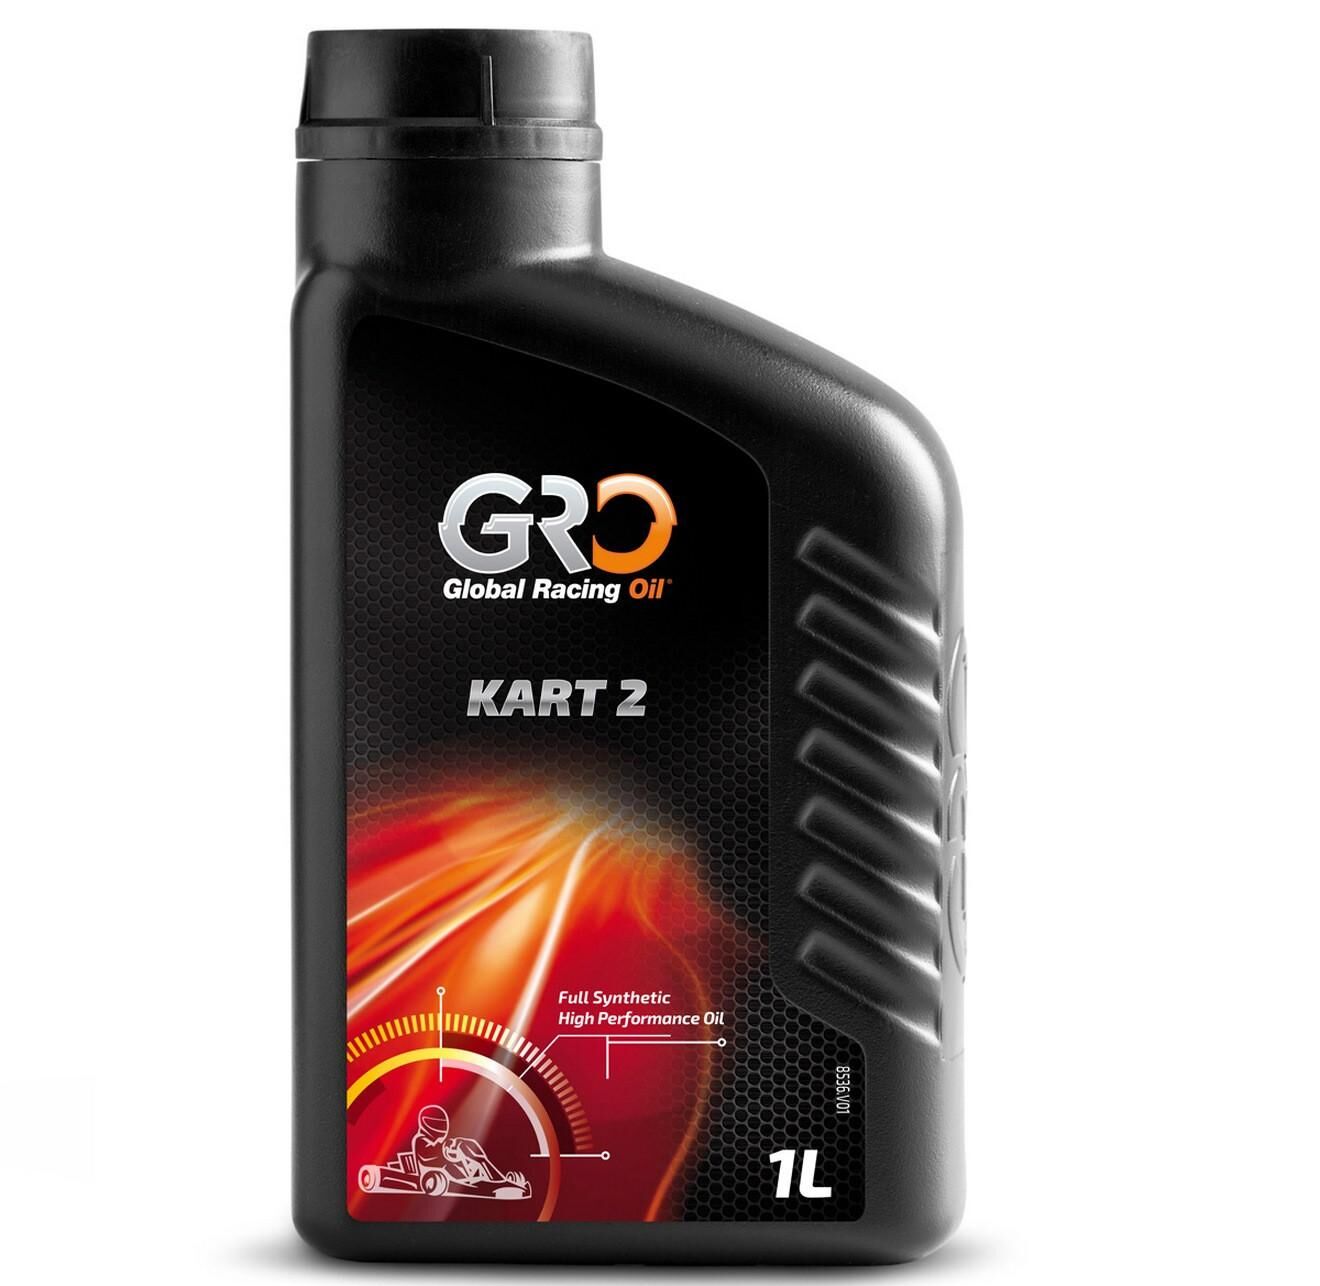 Global Racing Oil Huile marque global racing oil 2 temps kart-2 100% synthèse 1l